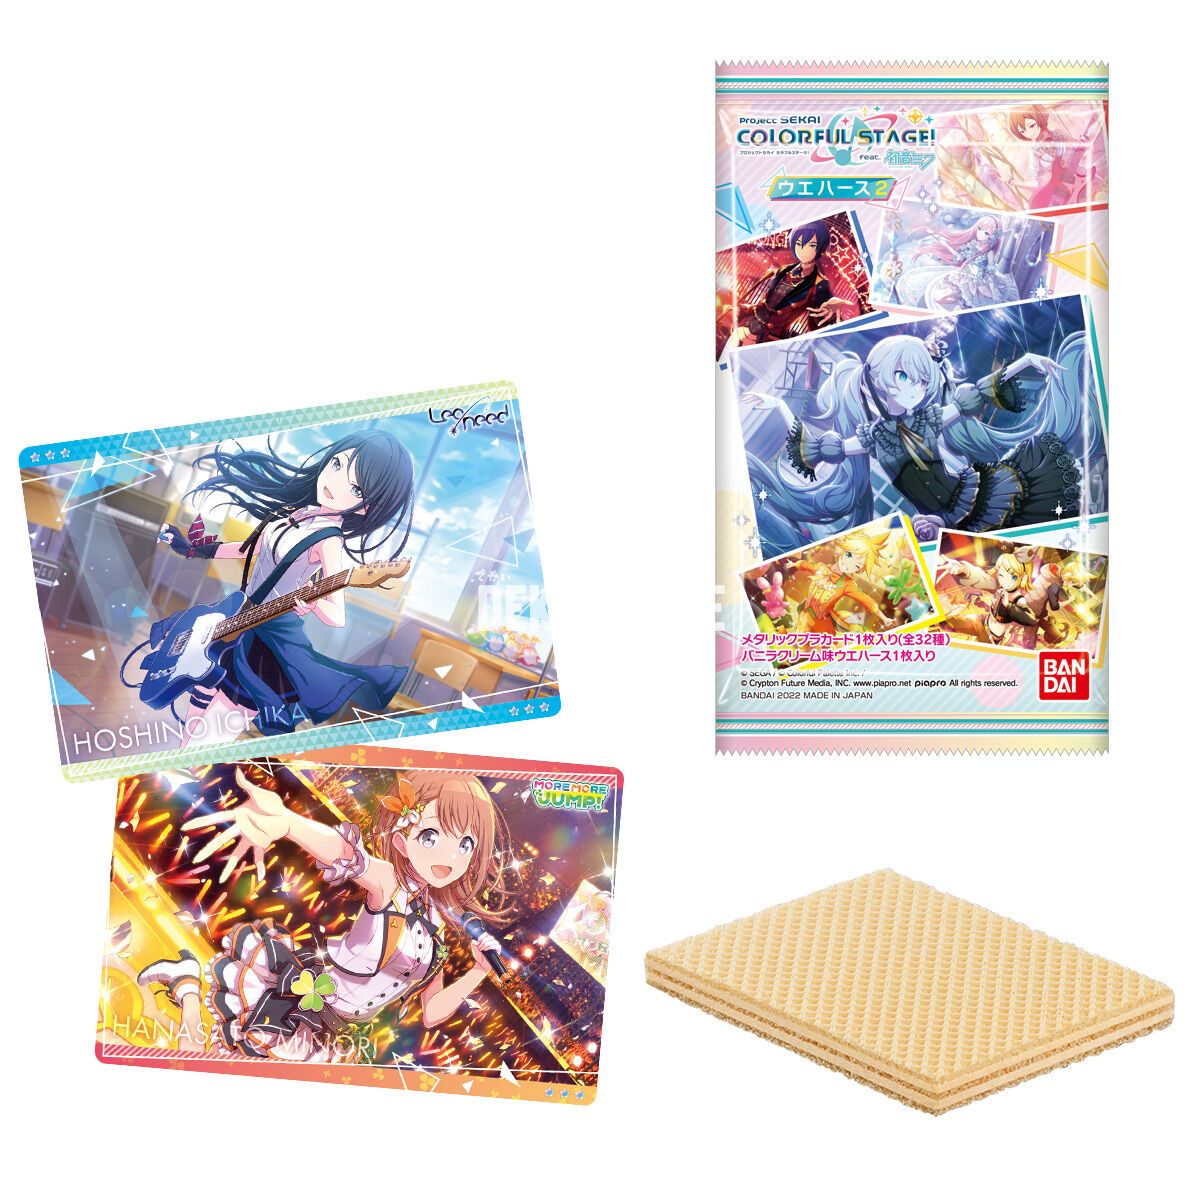 Copy of Hatsune Miku, Project Sekai Colorful Stage! Volume 2, Collectible Card and Wafer Cookie